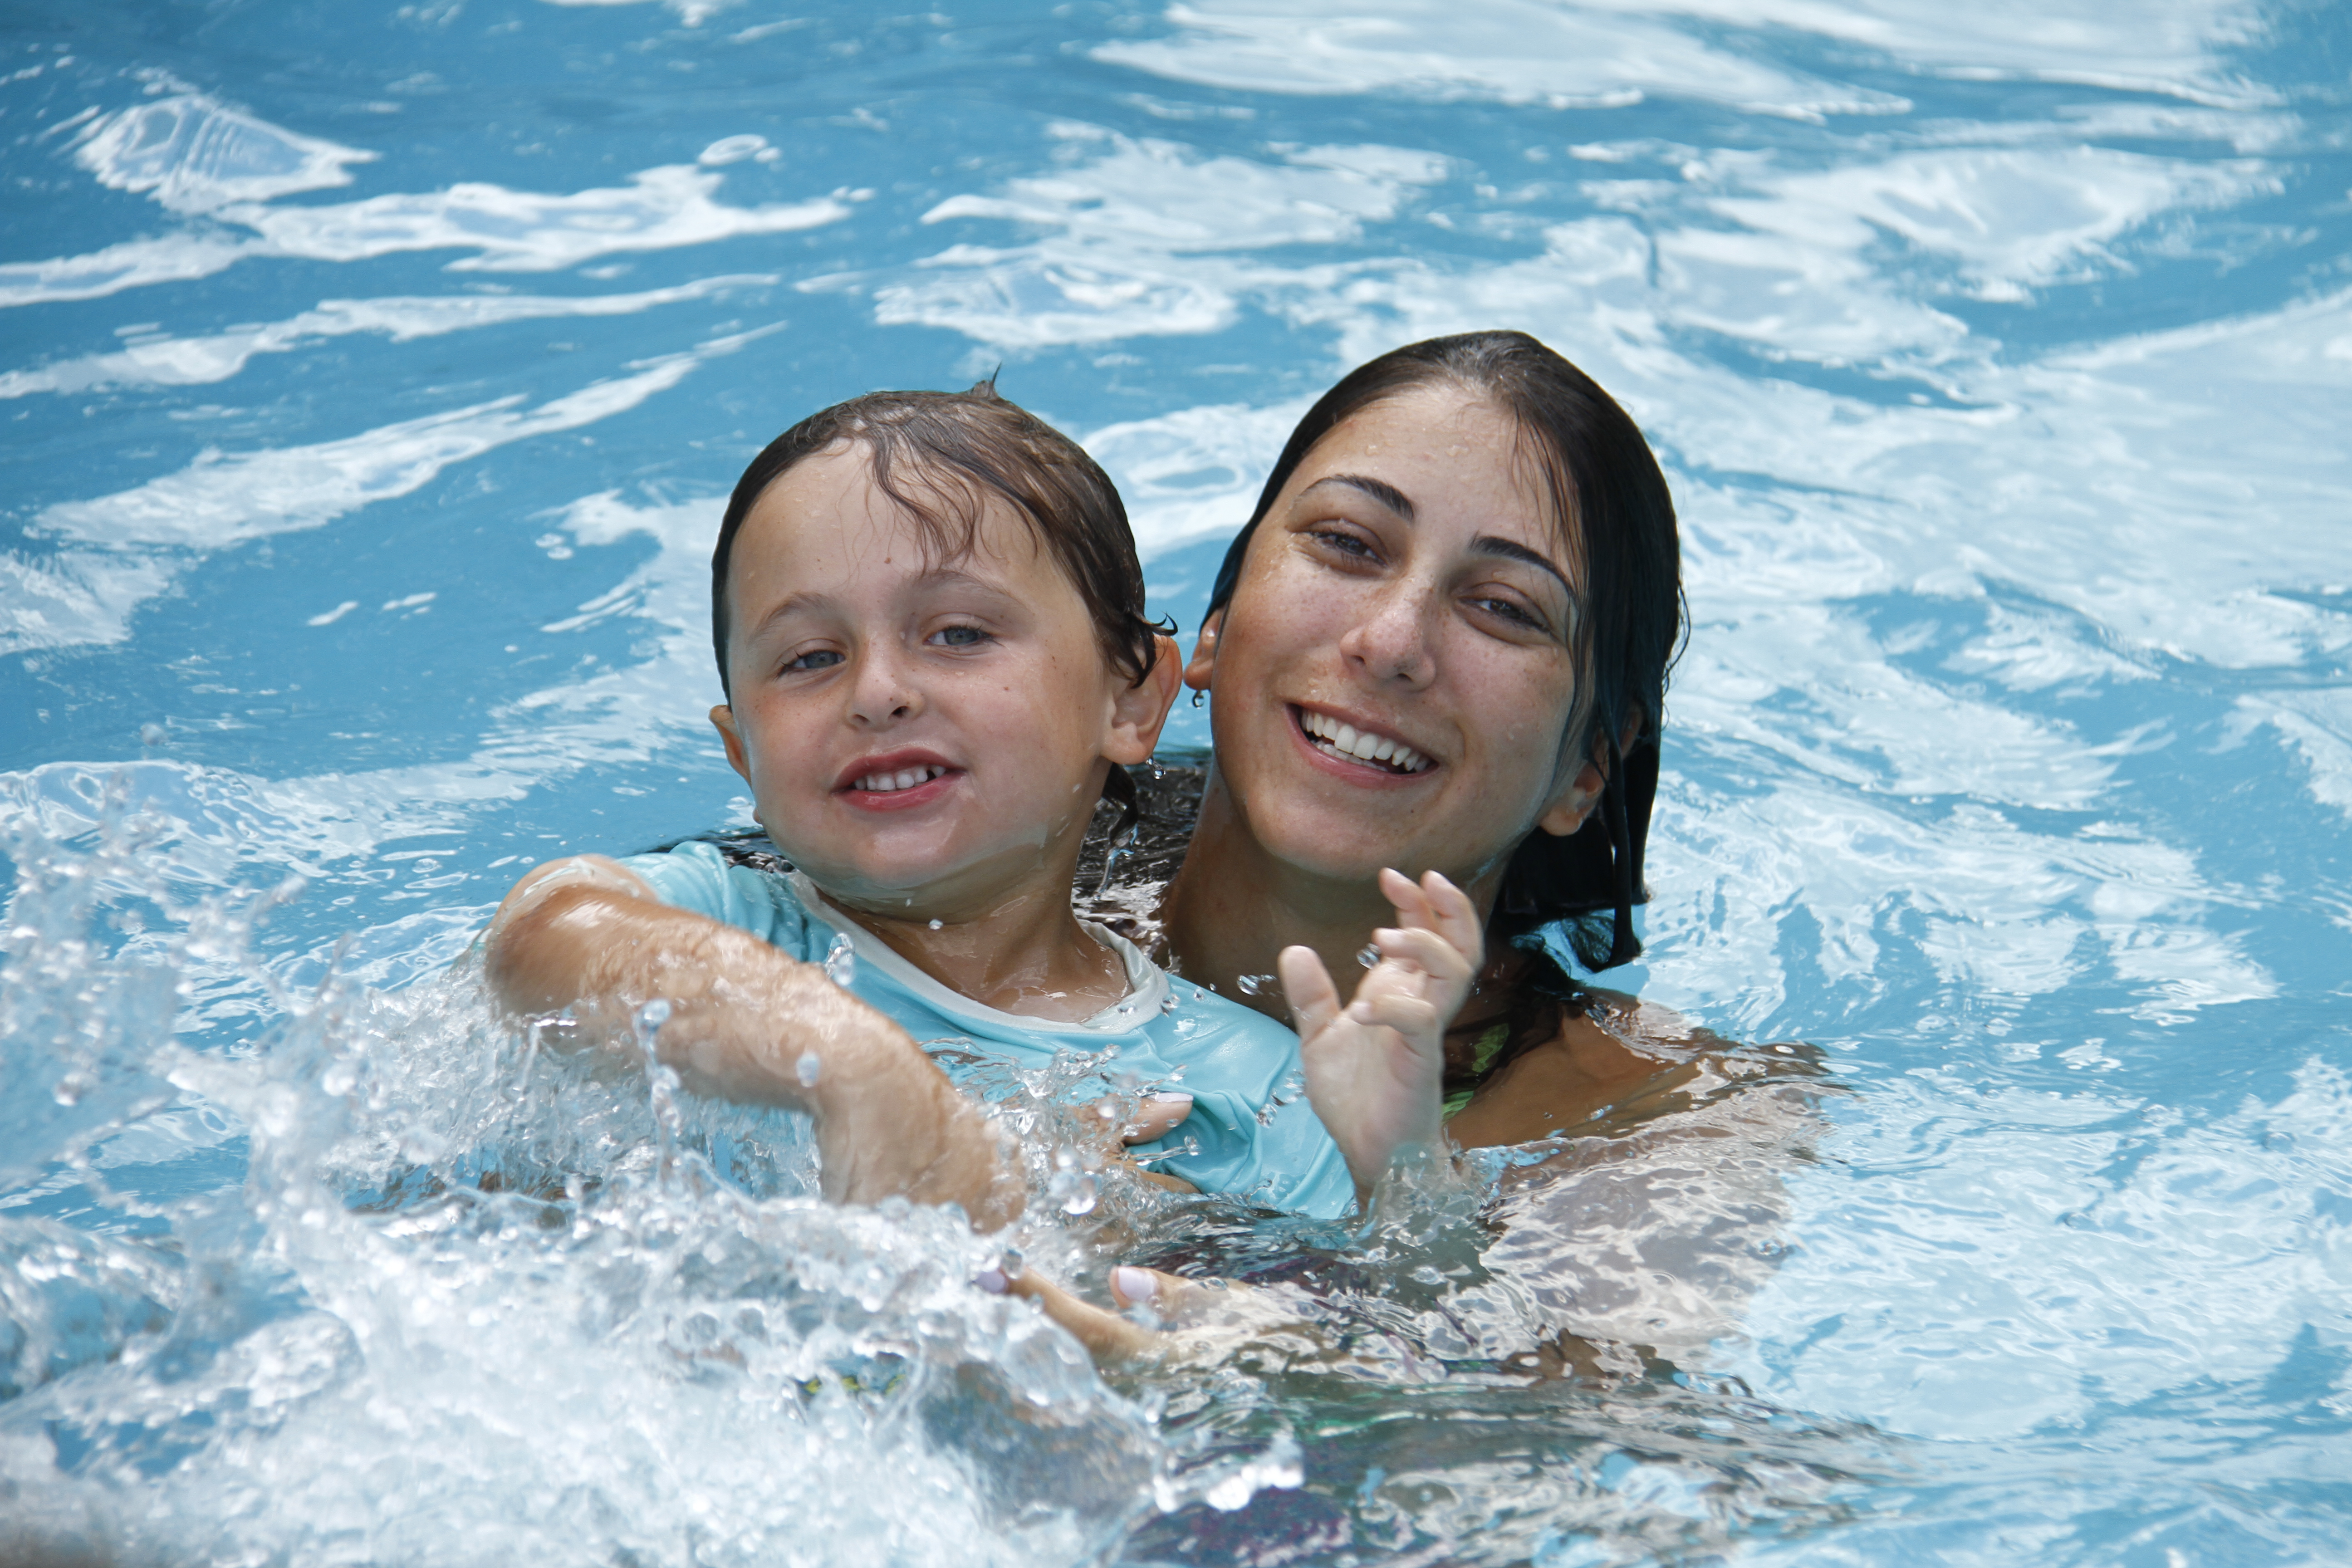 One of our highly trained swimming instructors helps a young camper learn how to swim.